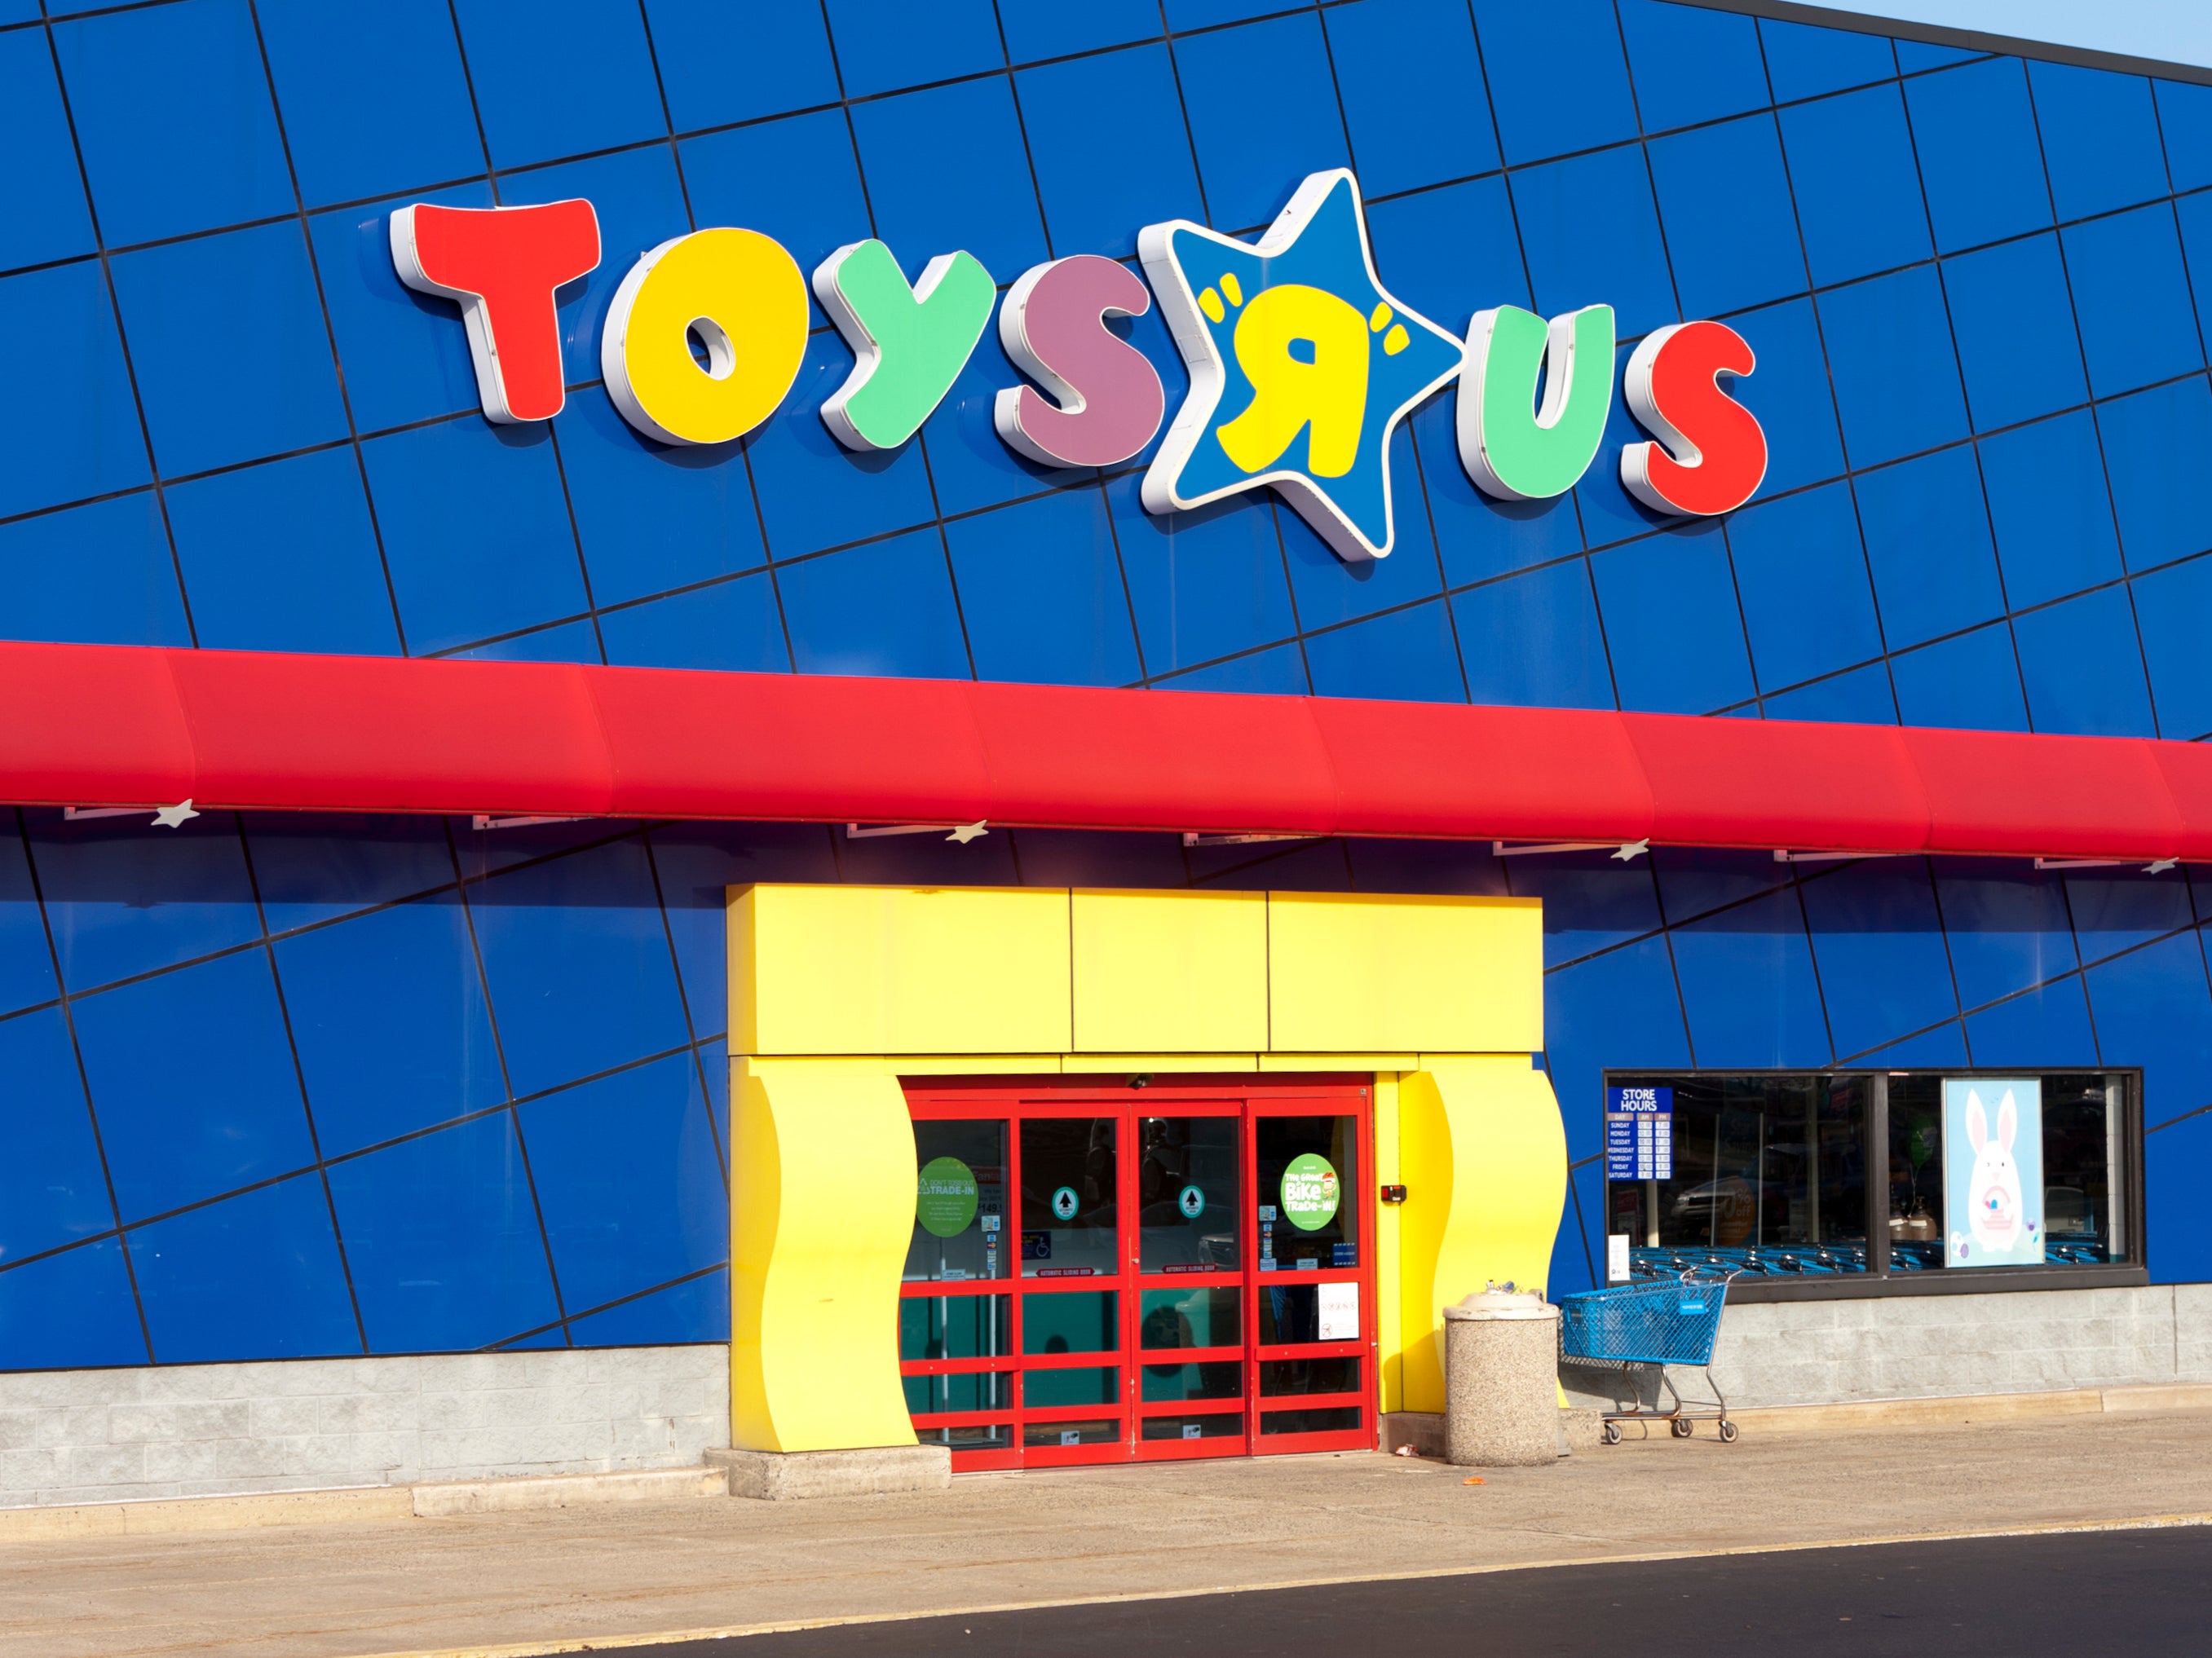 A Toys ‘R’ Us store in the US